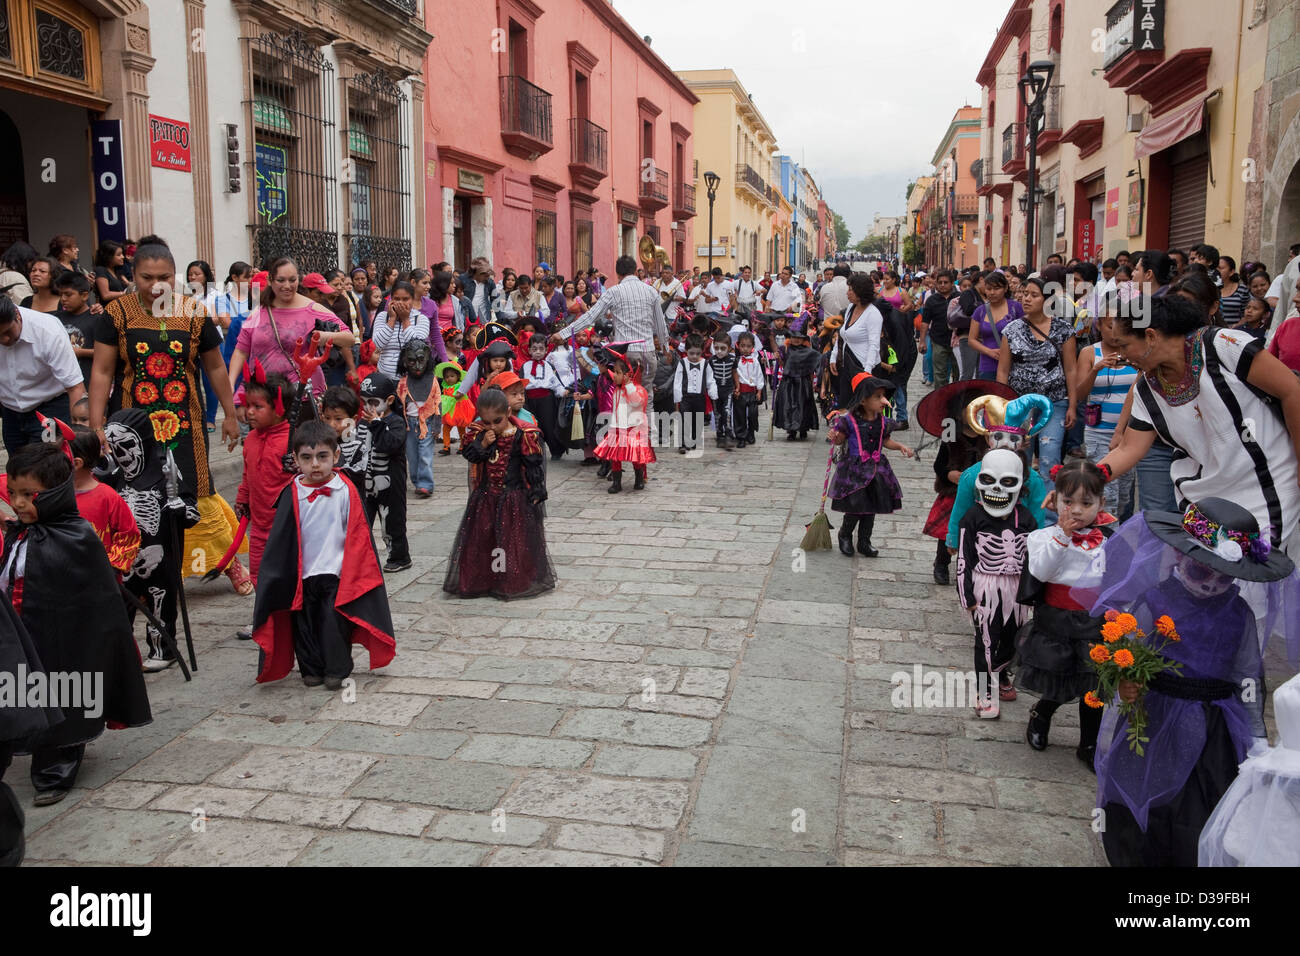 Children's Day of the Dead parade heading for the Zocalo (central plaza) in Oaxaca, Mexico. Stock Photo